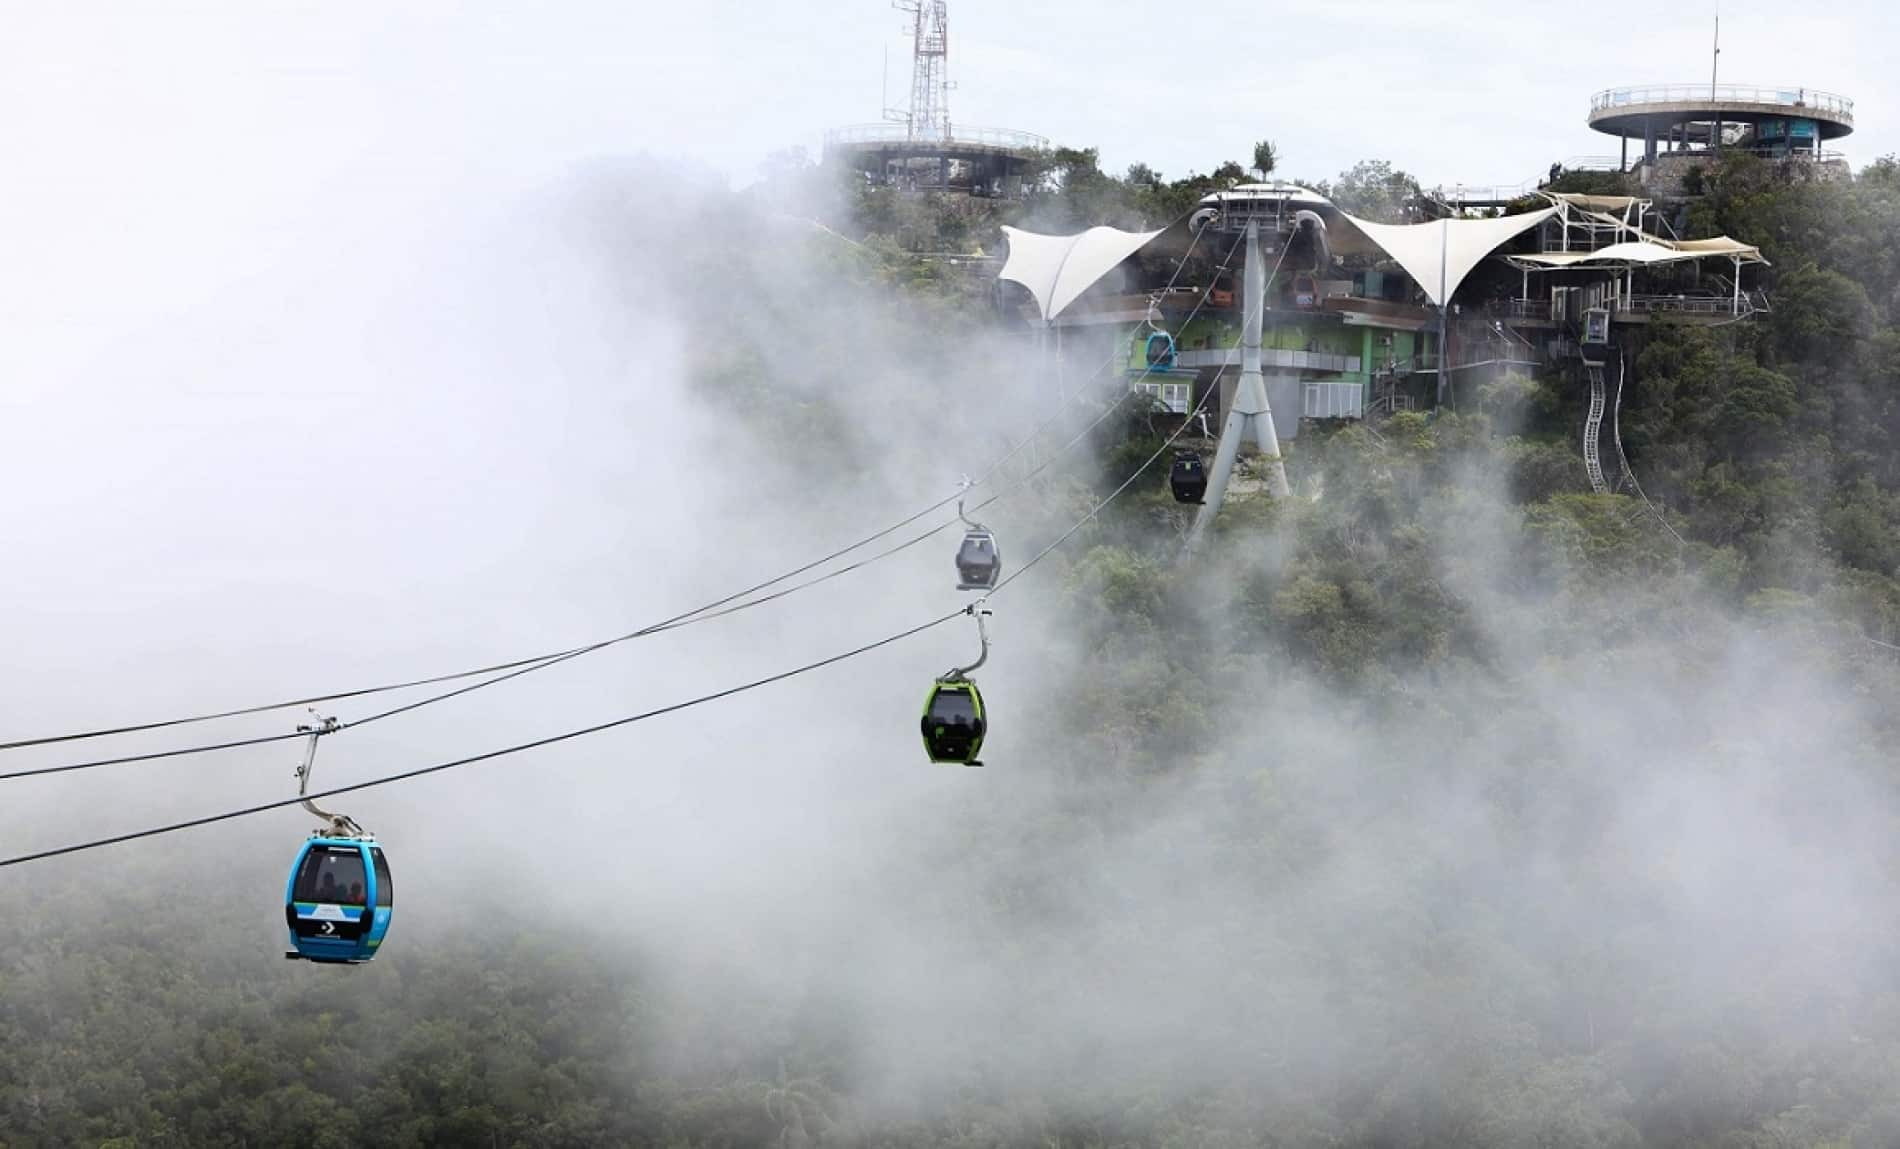 Langkawi SkyCab Cable Car Ticket Booking Online